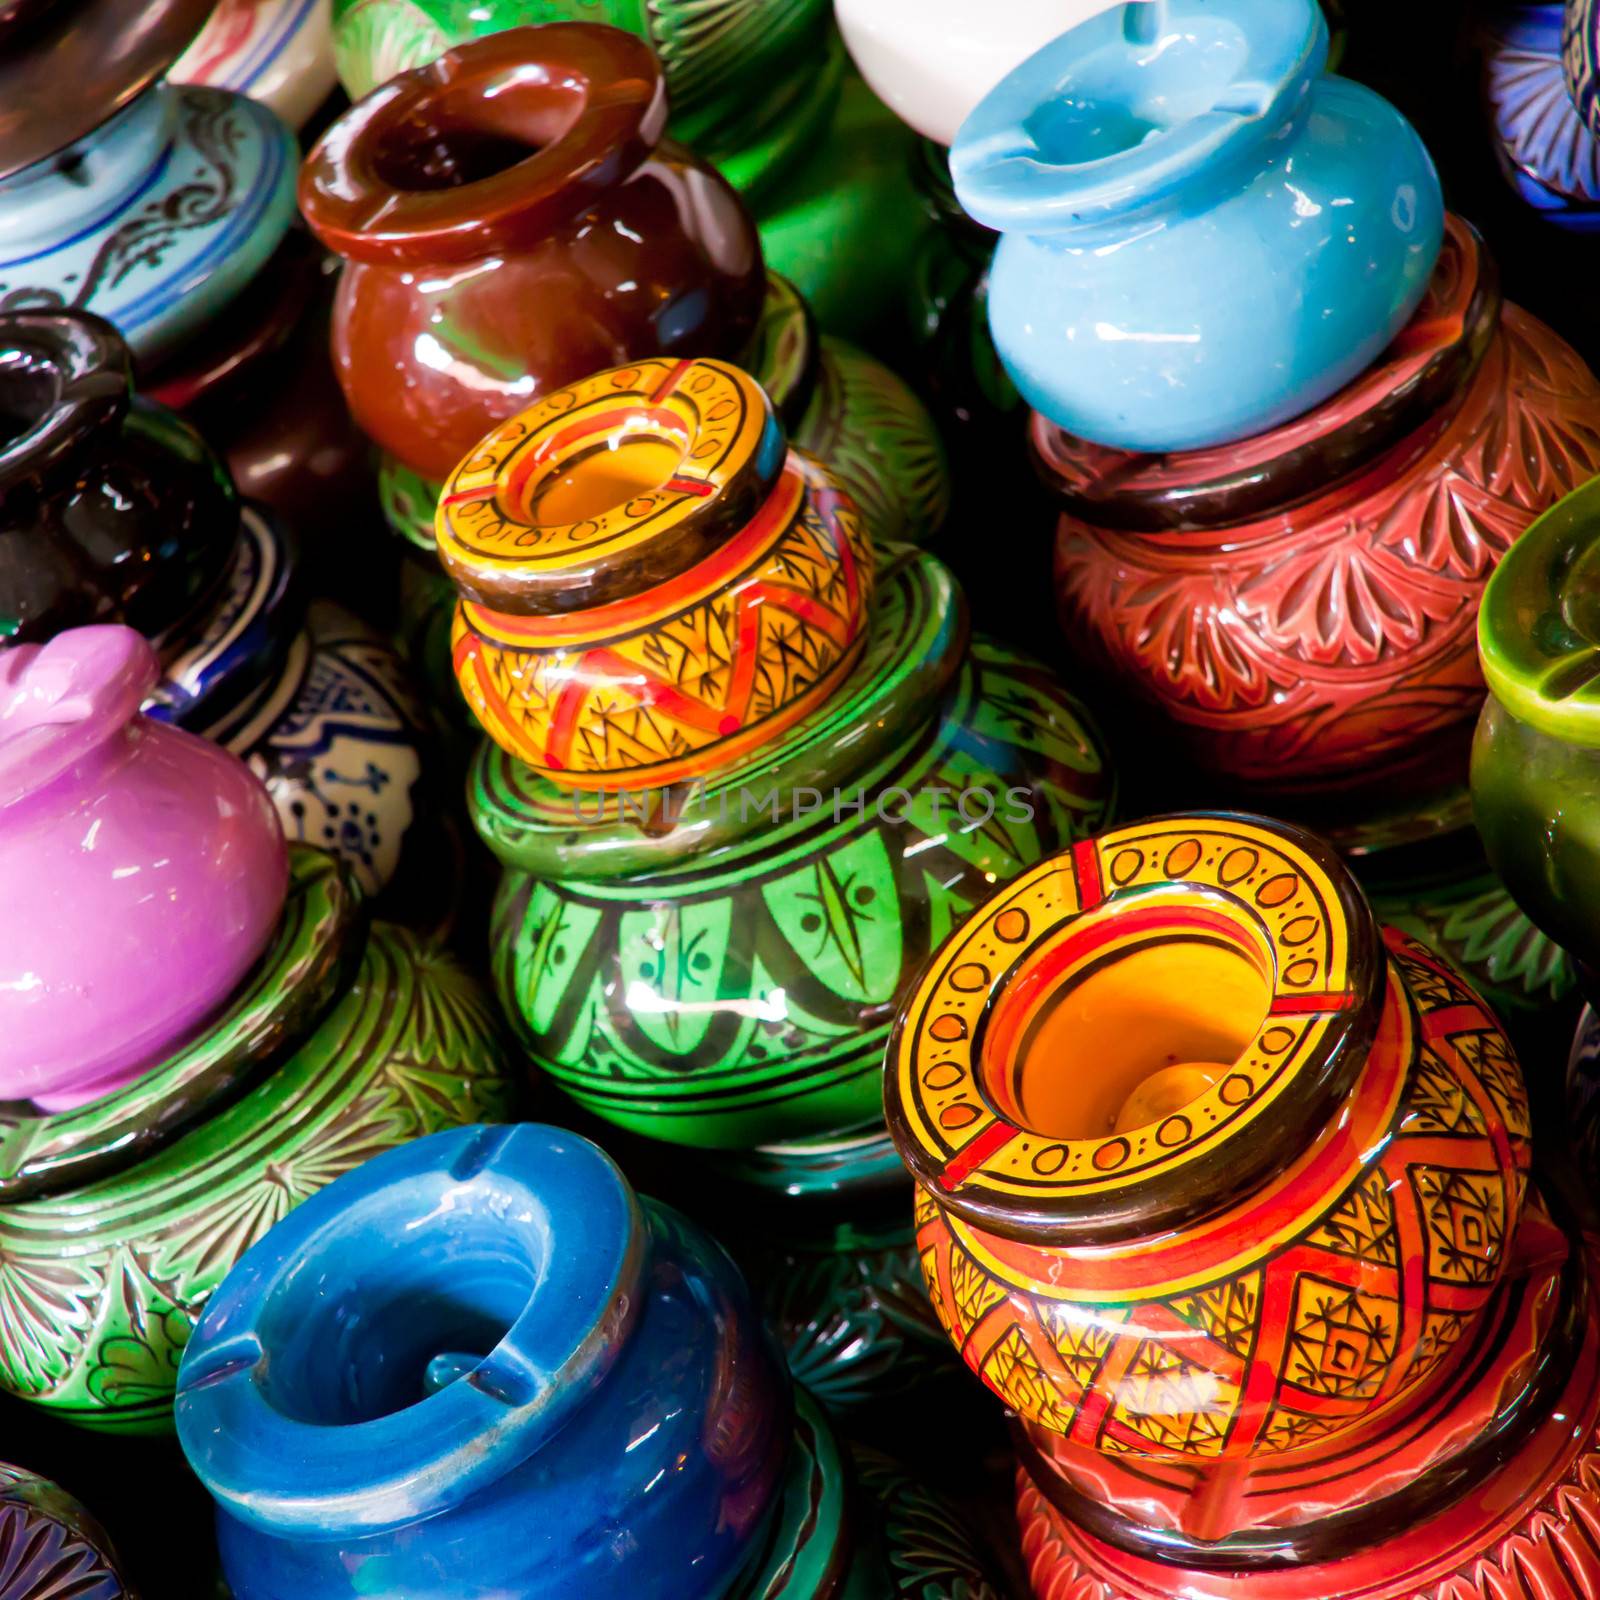 Morocco crafts by kasto